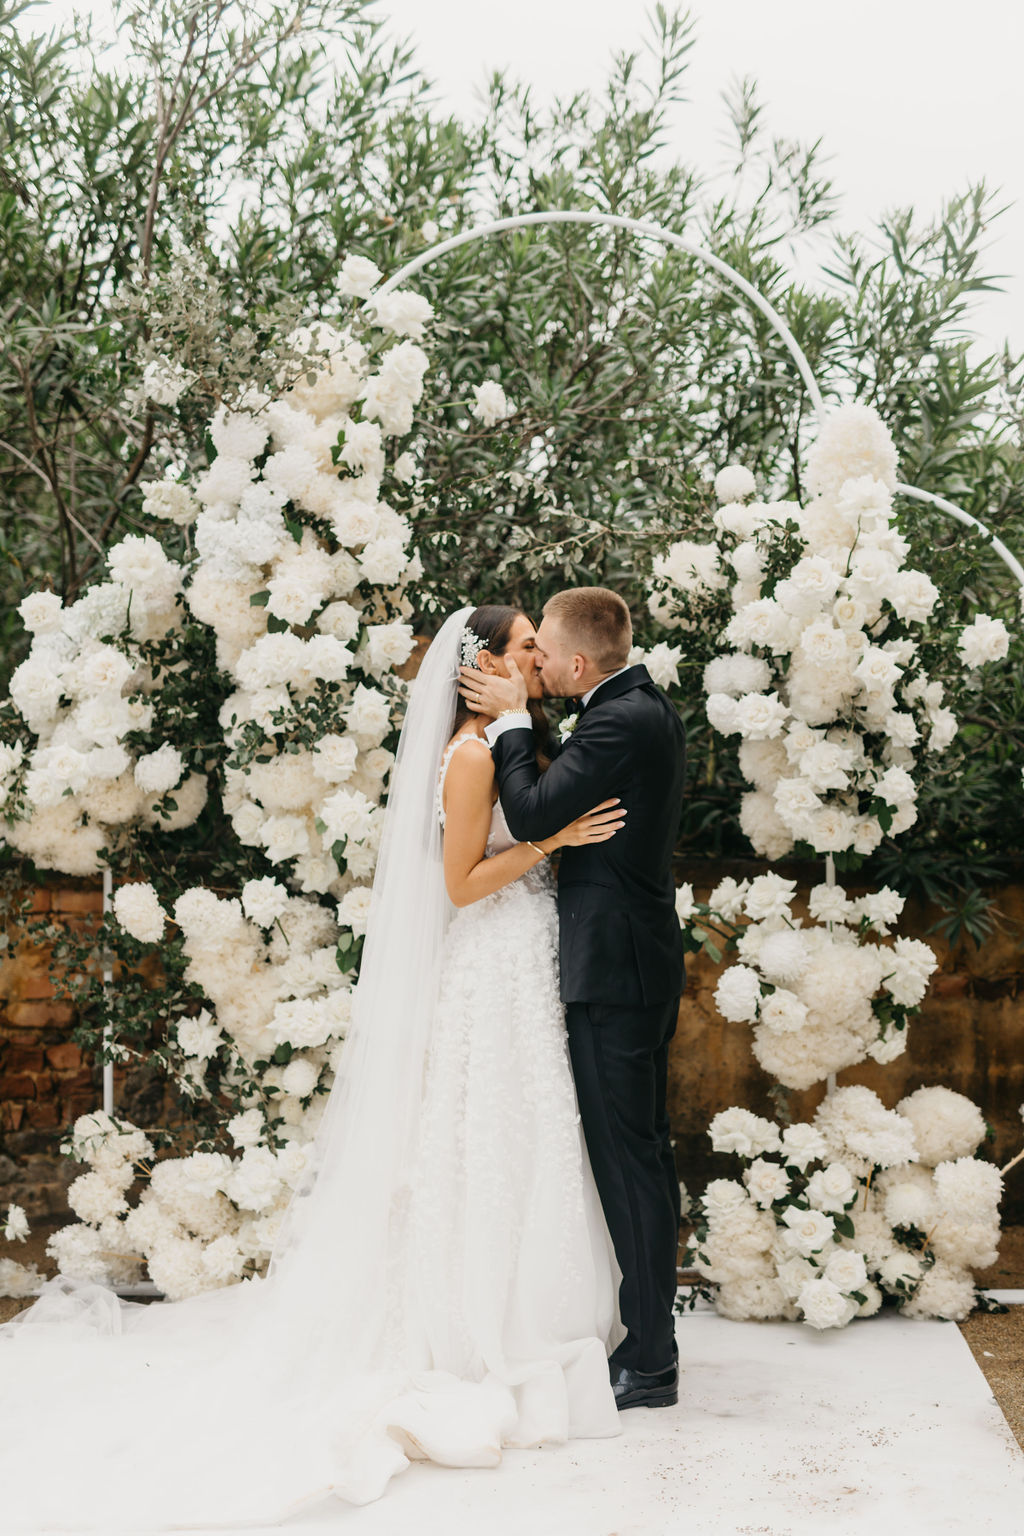 Real Wedding: Monique and Alex, Deux Belettes Byron Bay | The Events Lounge, Byron Bay Wedding Planner